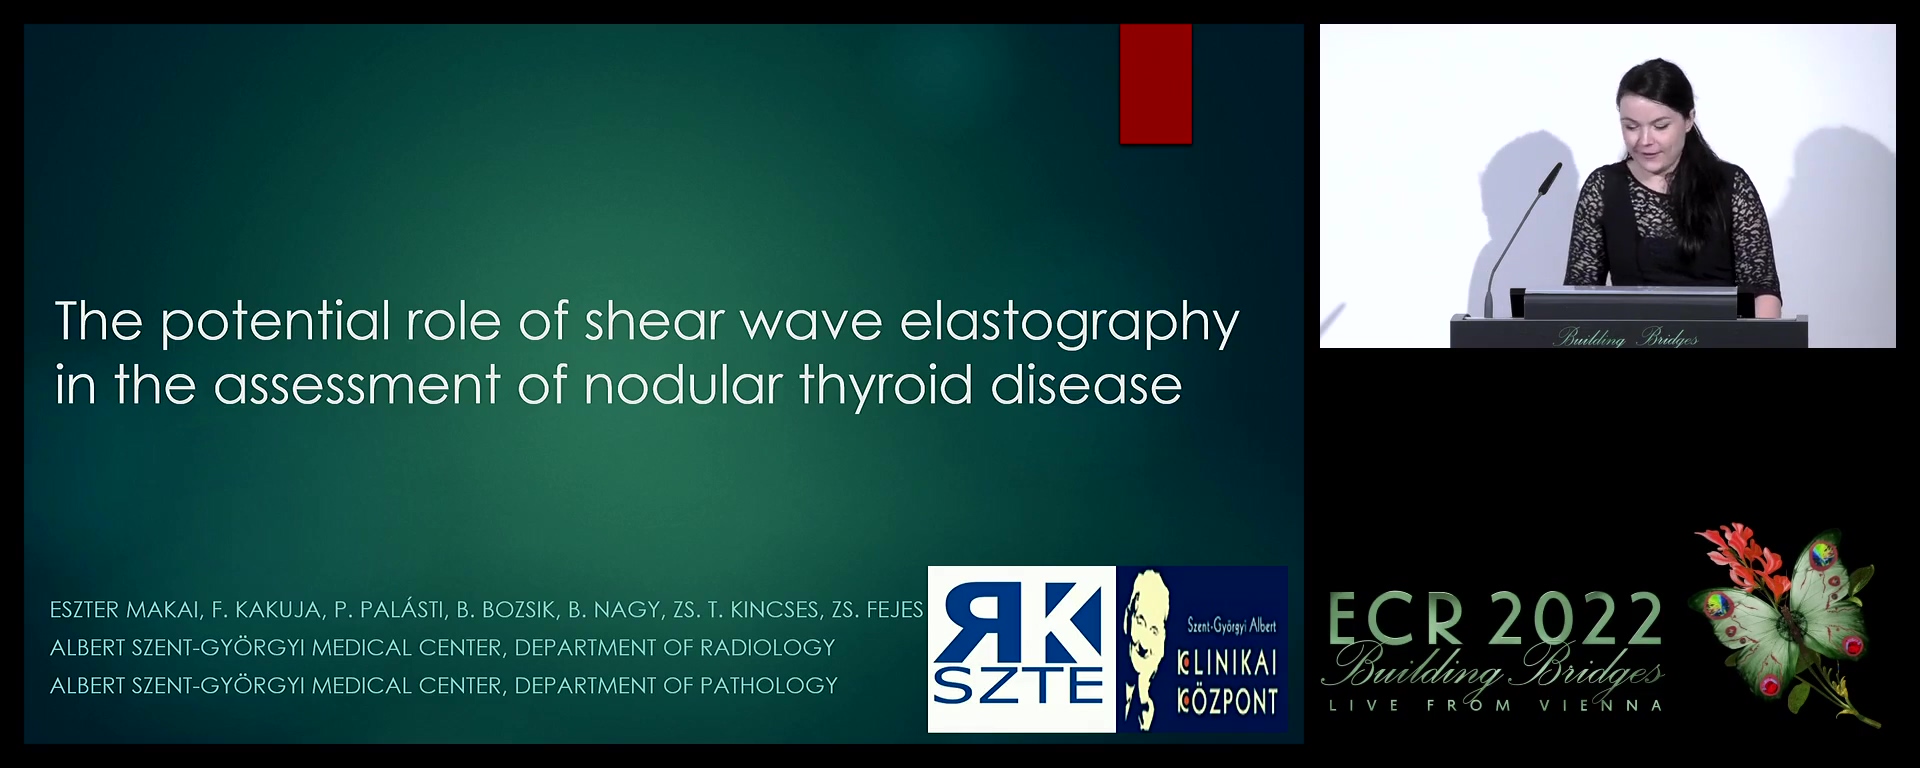 The potential role of shear wave elastography in the assessment of nodular thyroid disease